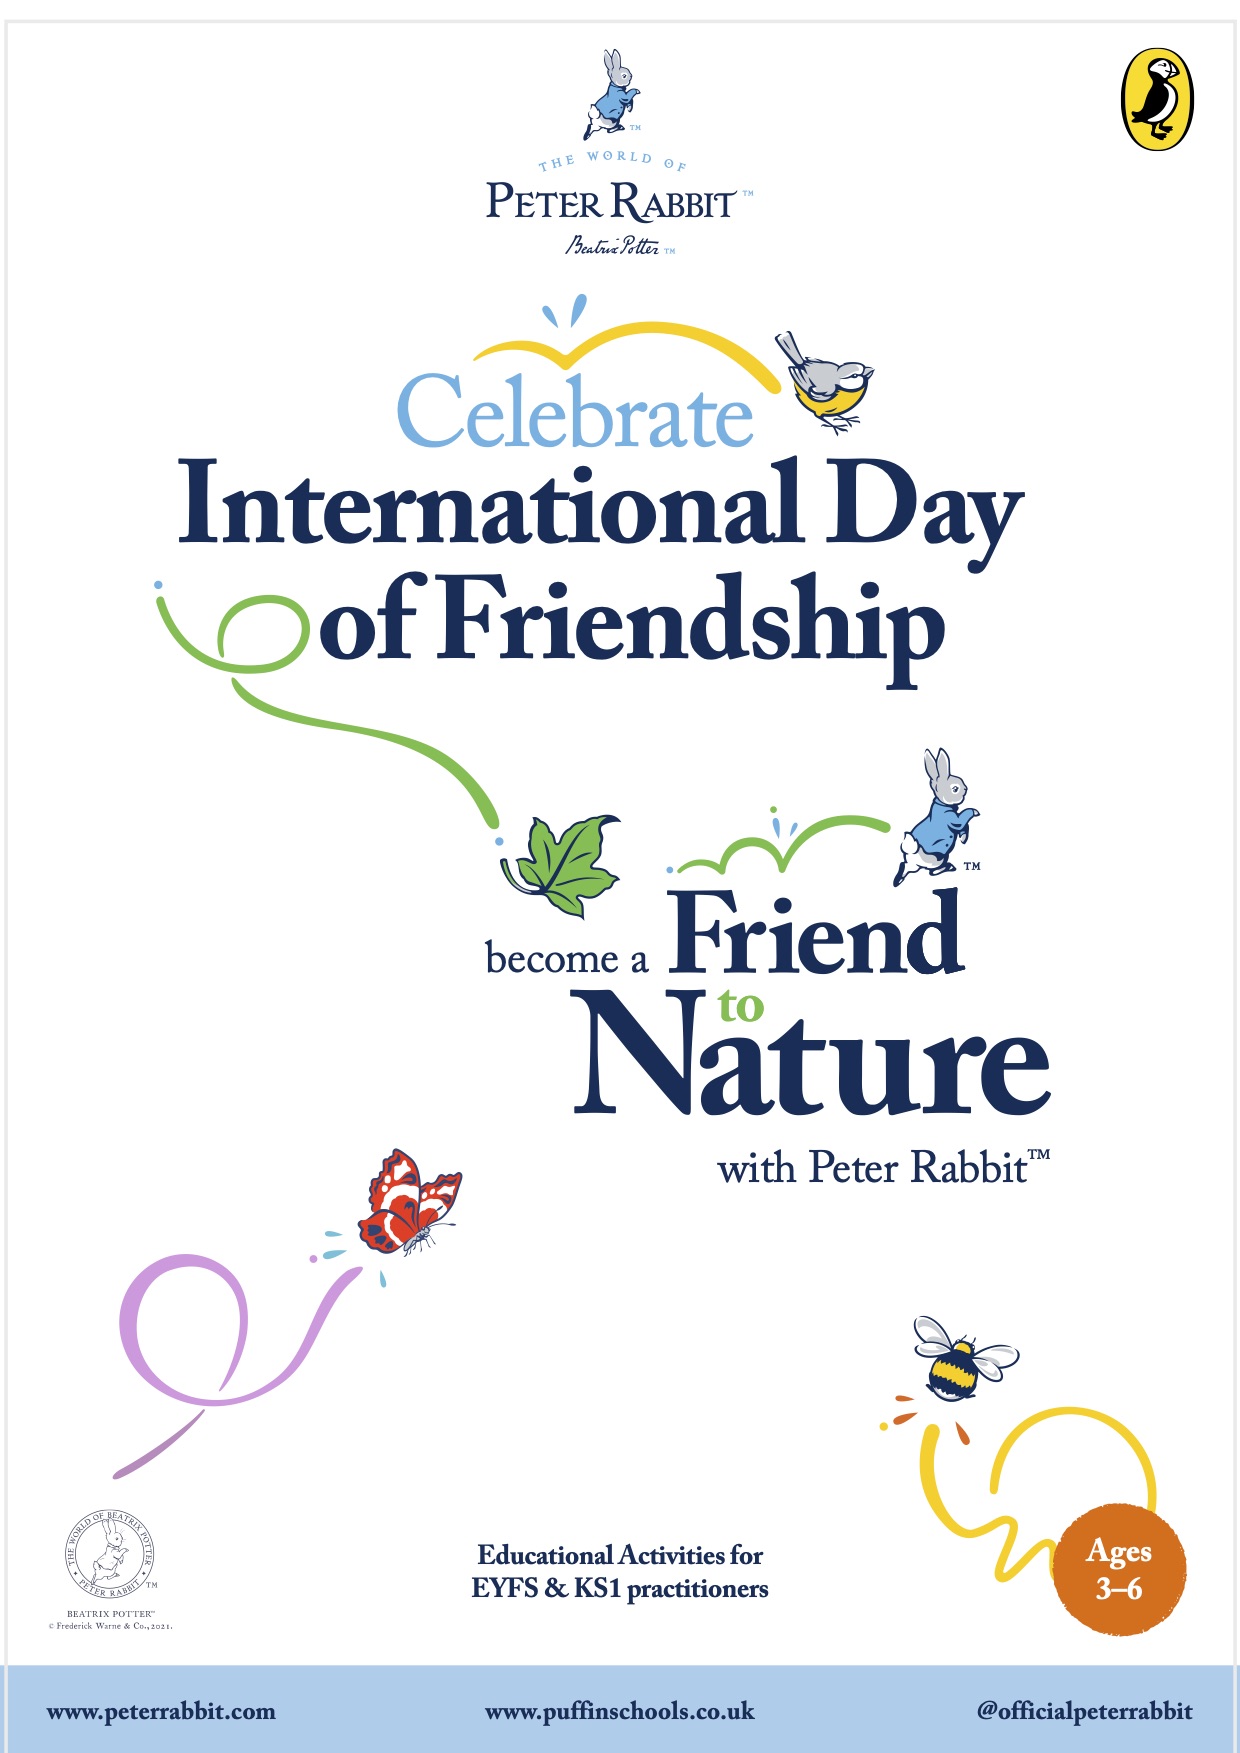 The cover image of the Friend to Nature Activity Pack on the Peter Rabbit website